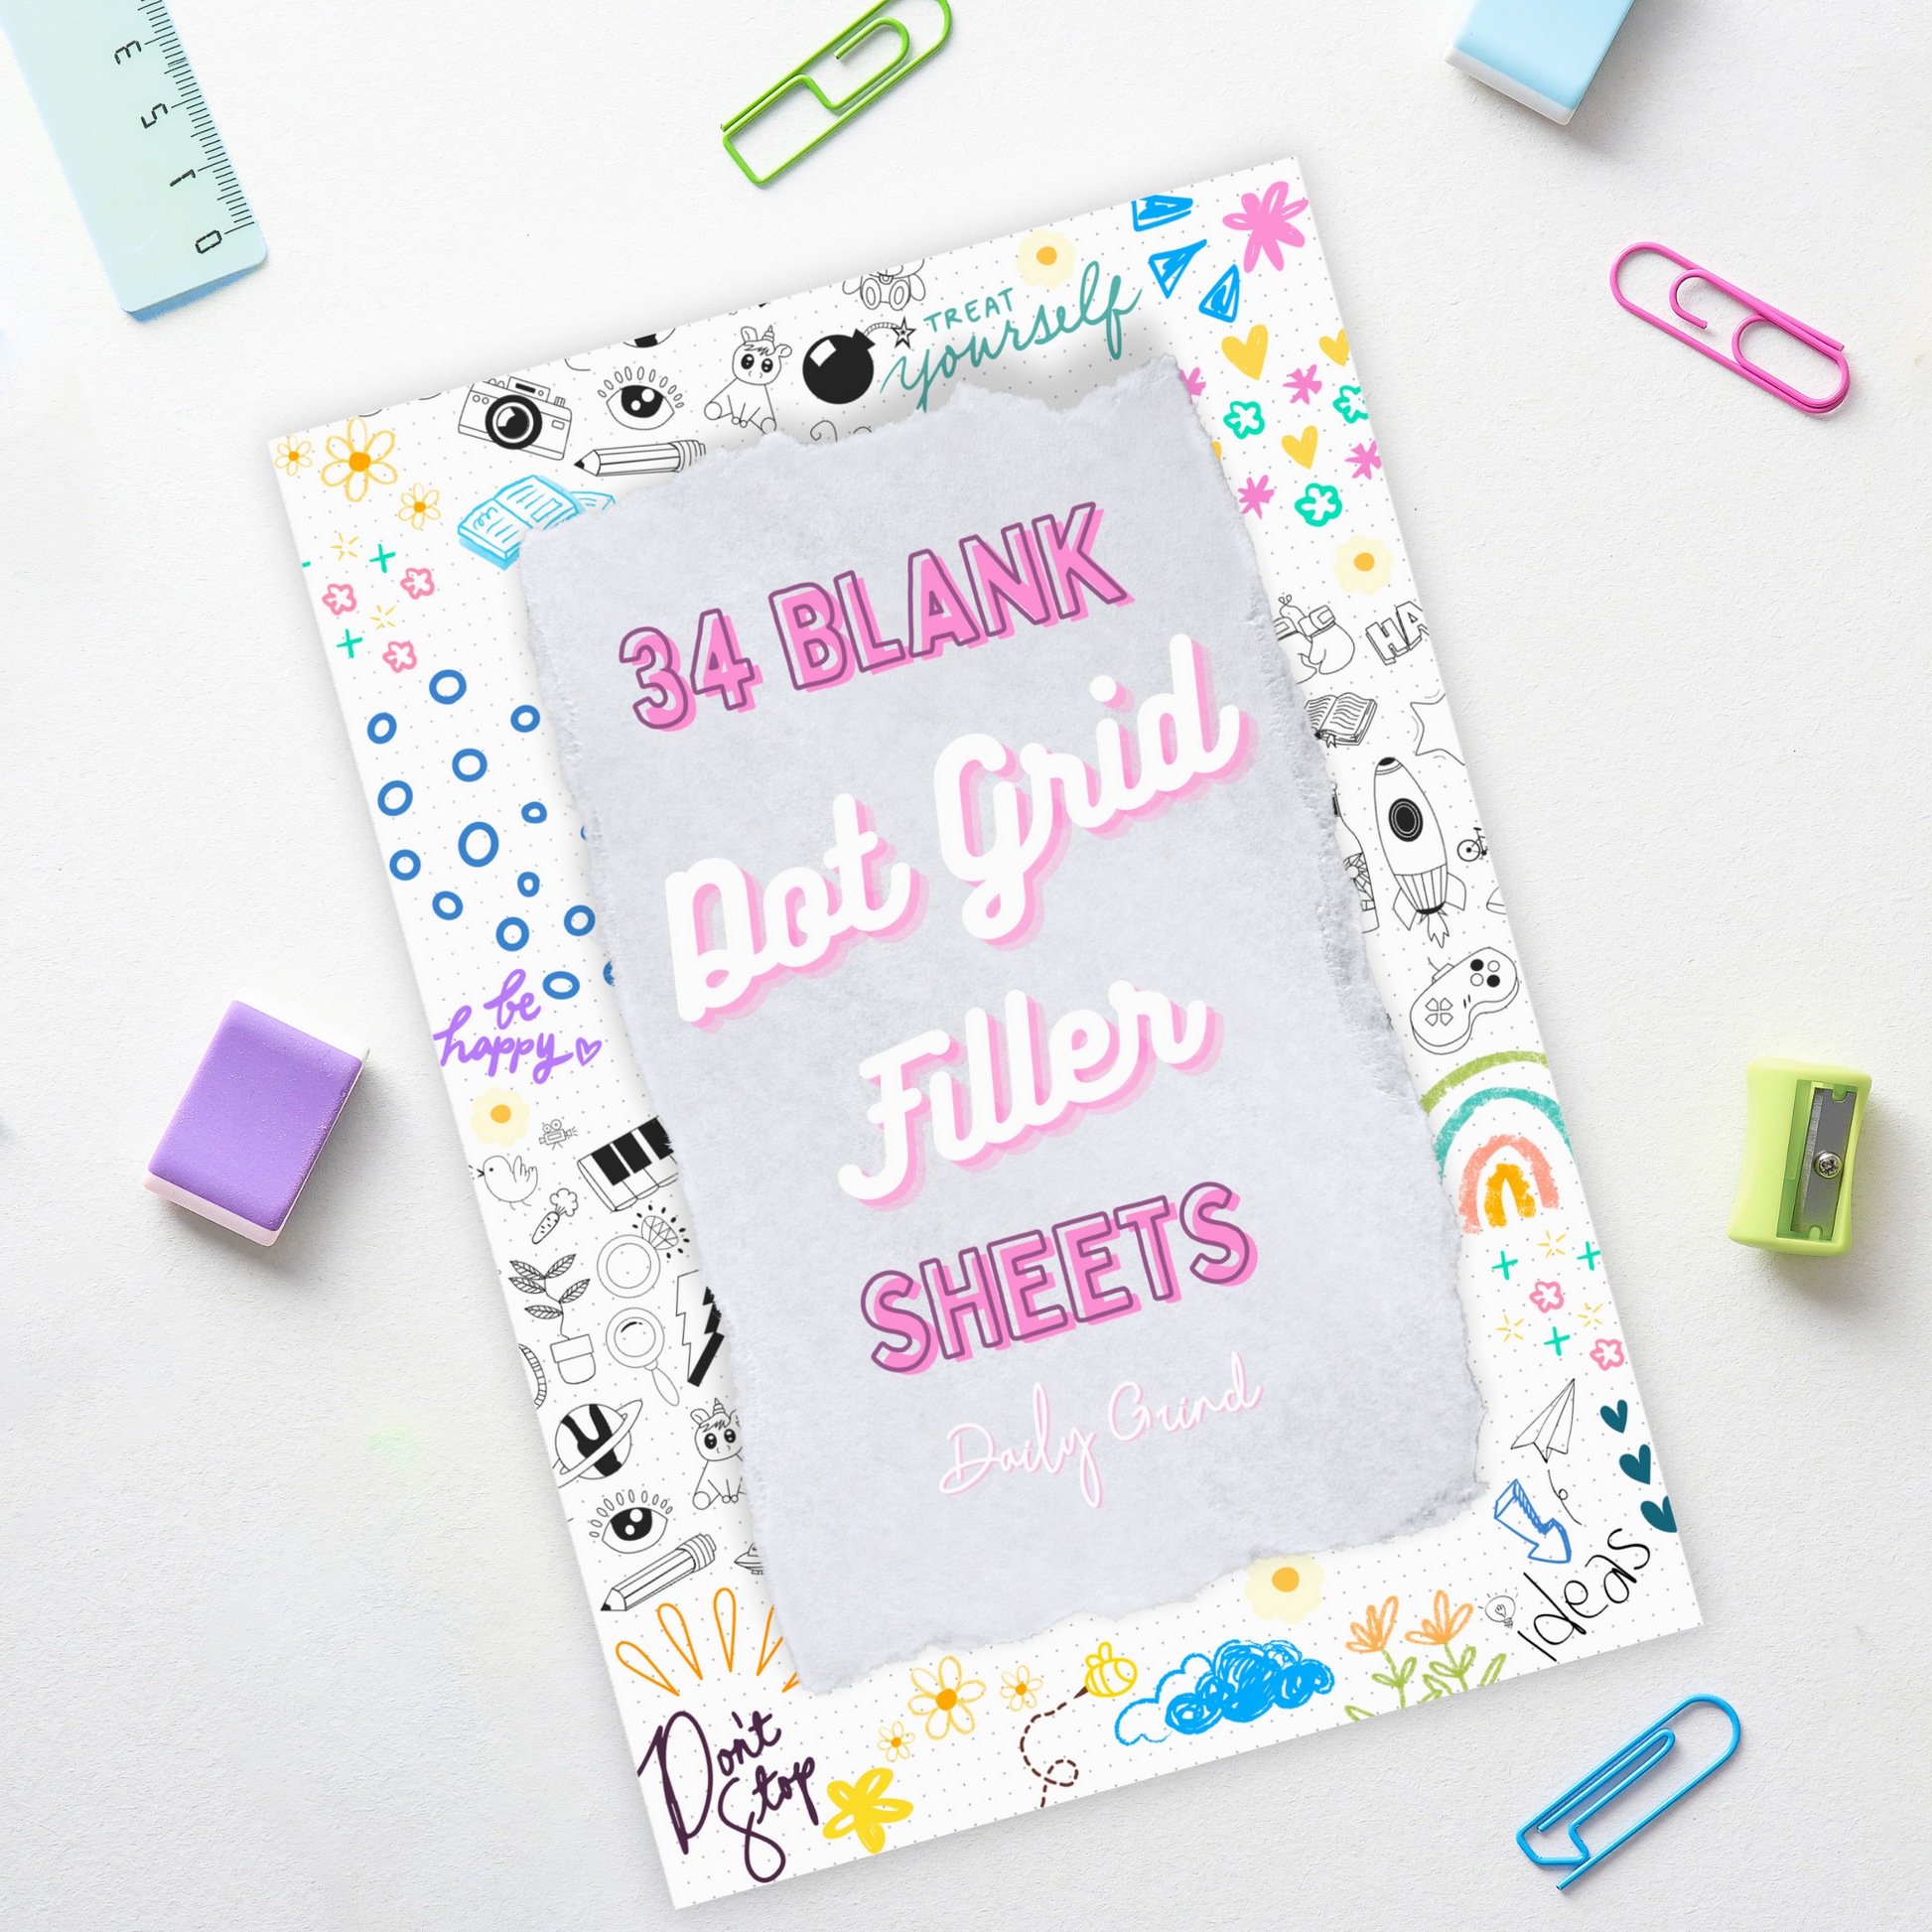 Cover sheet for "34 Blank Dot Grid Filler Pages"